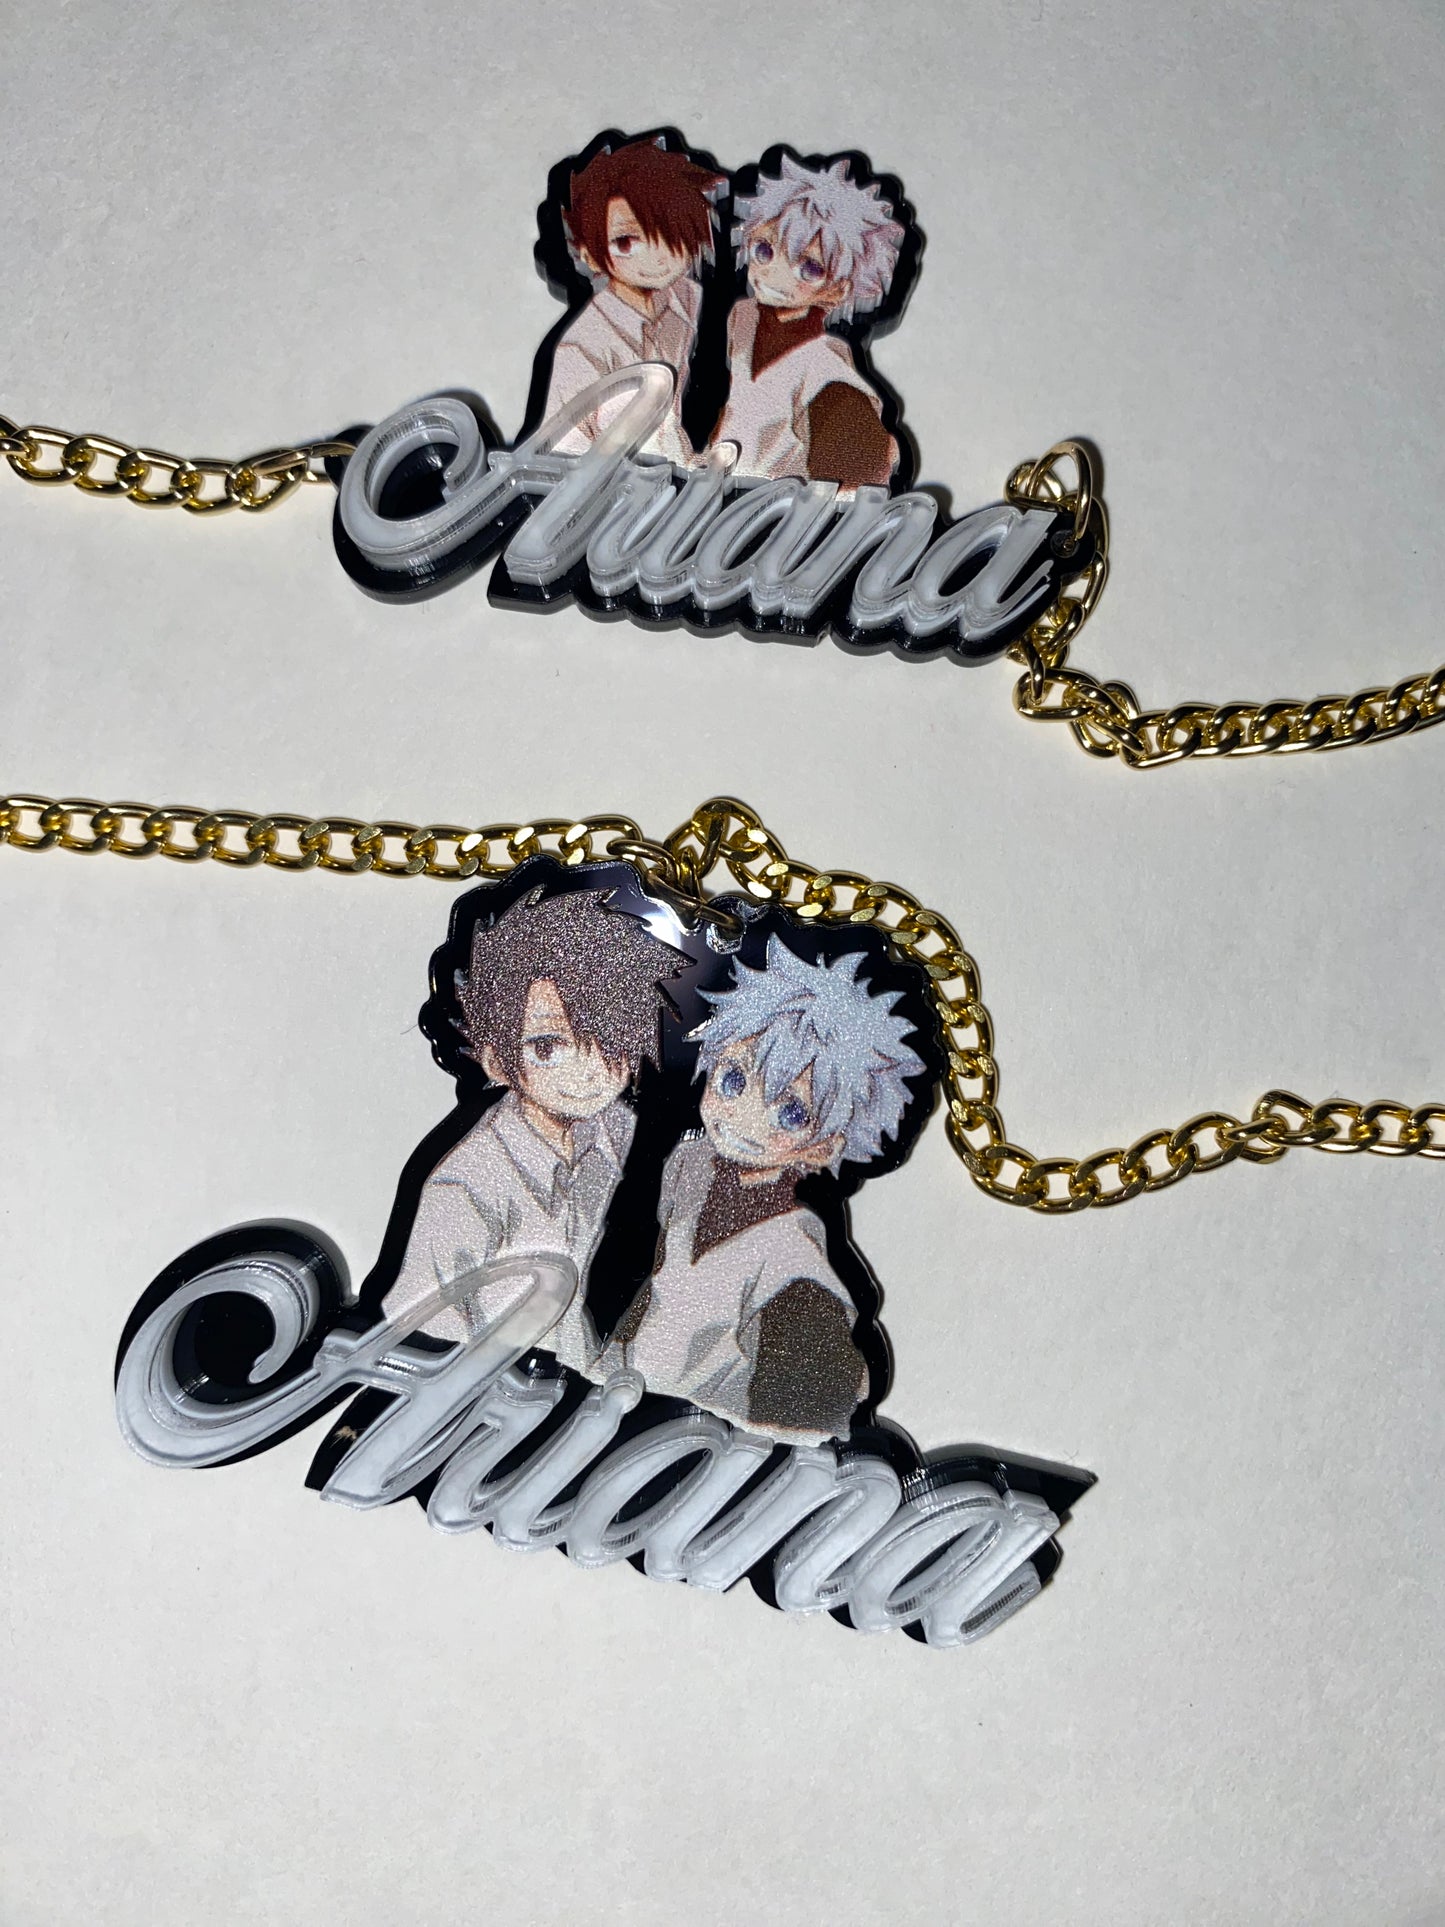 Best Character Acrylic Jewelry (Any Character)